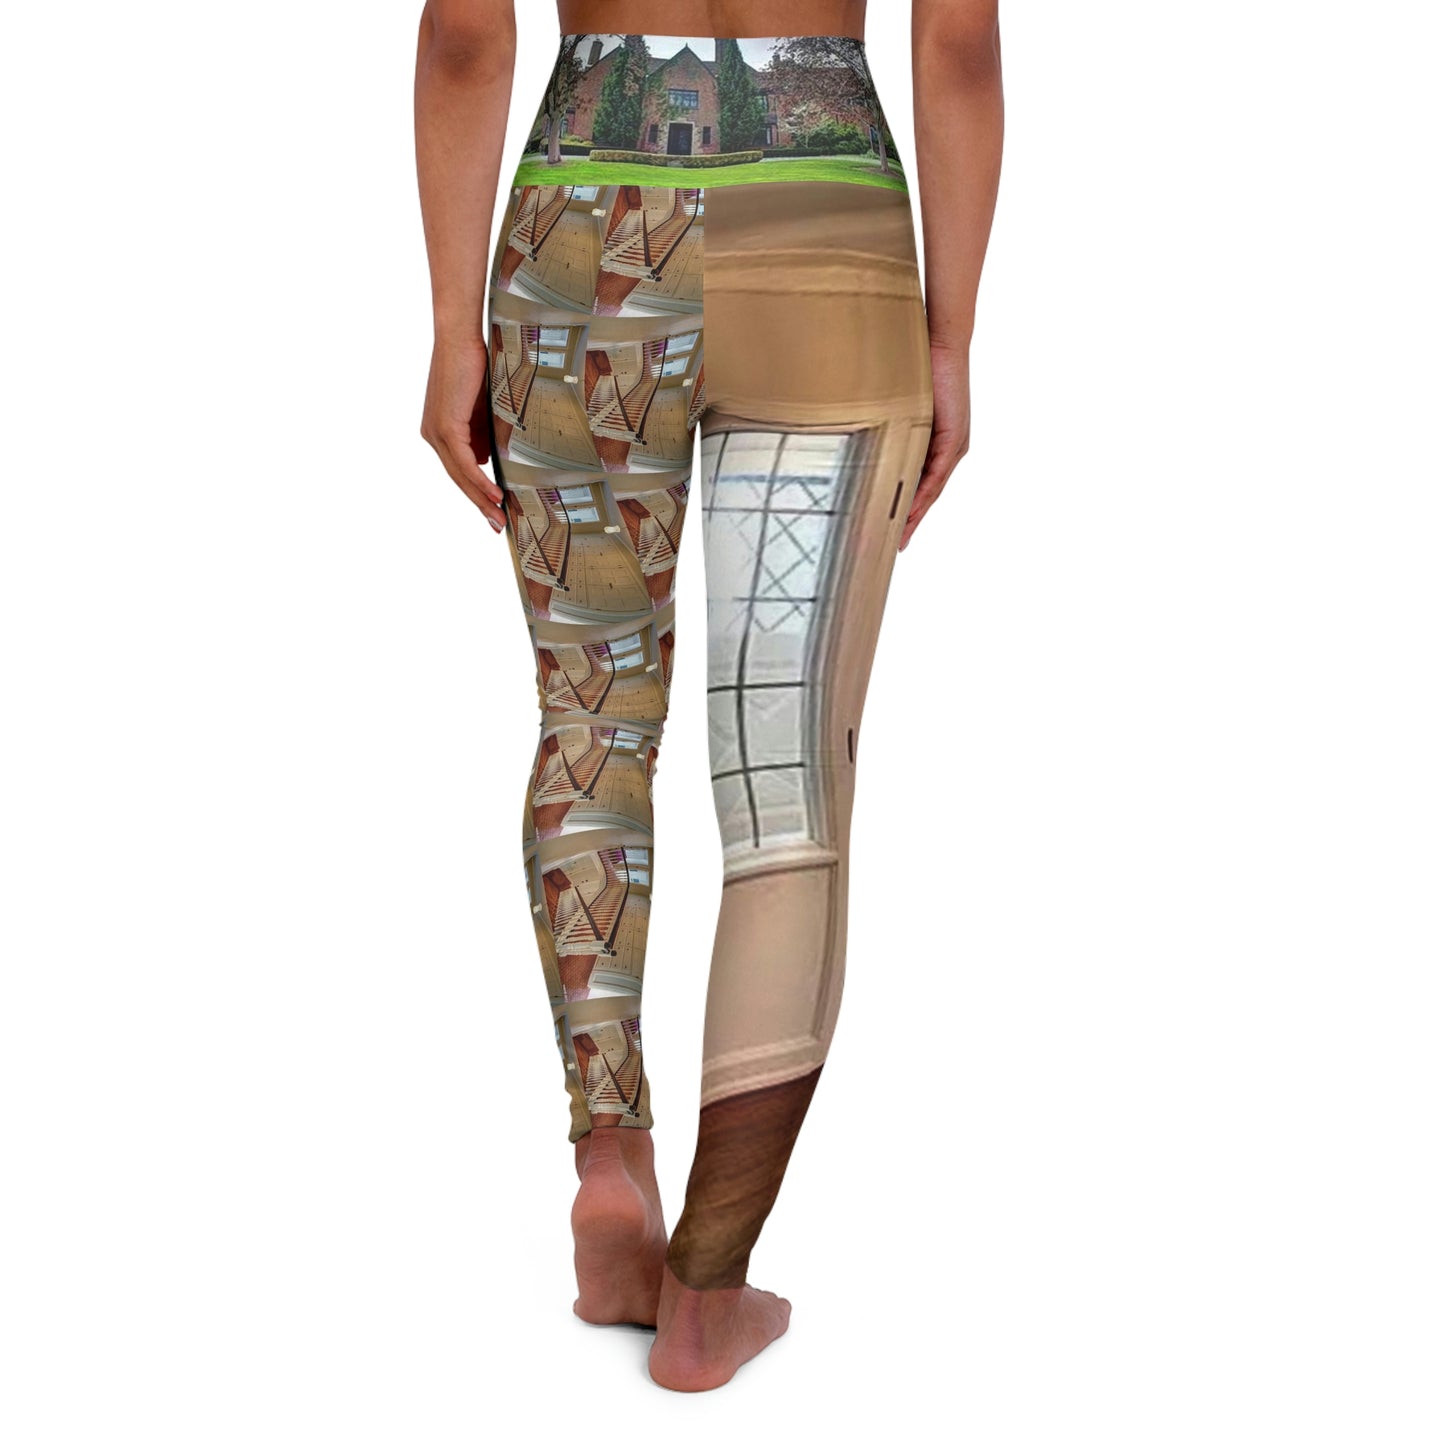 2800 S Main 45840 Housing Boom Collection High Waisted Yoga Leggings (AOP)